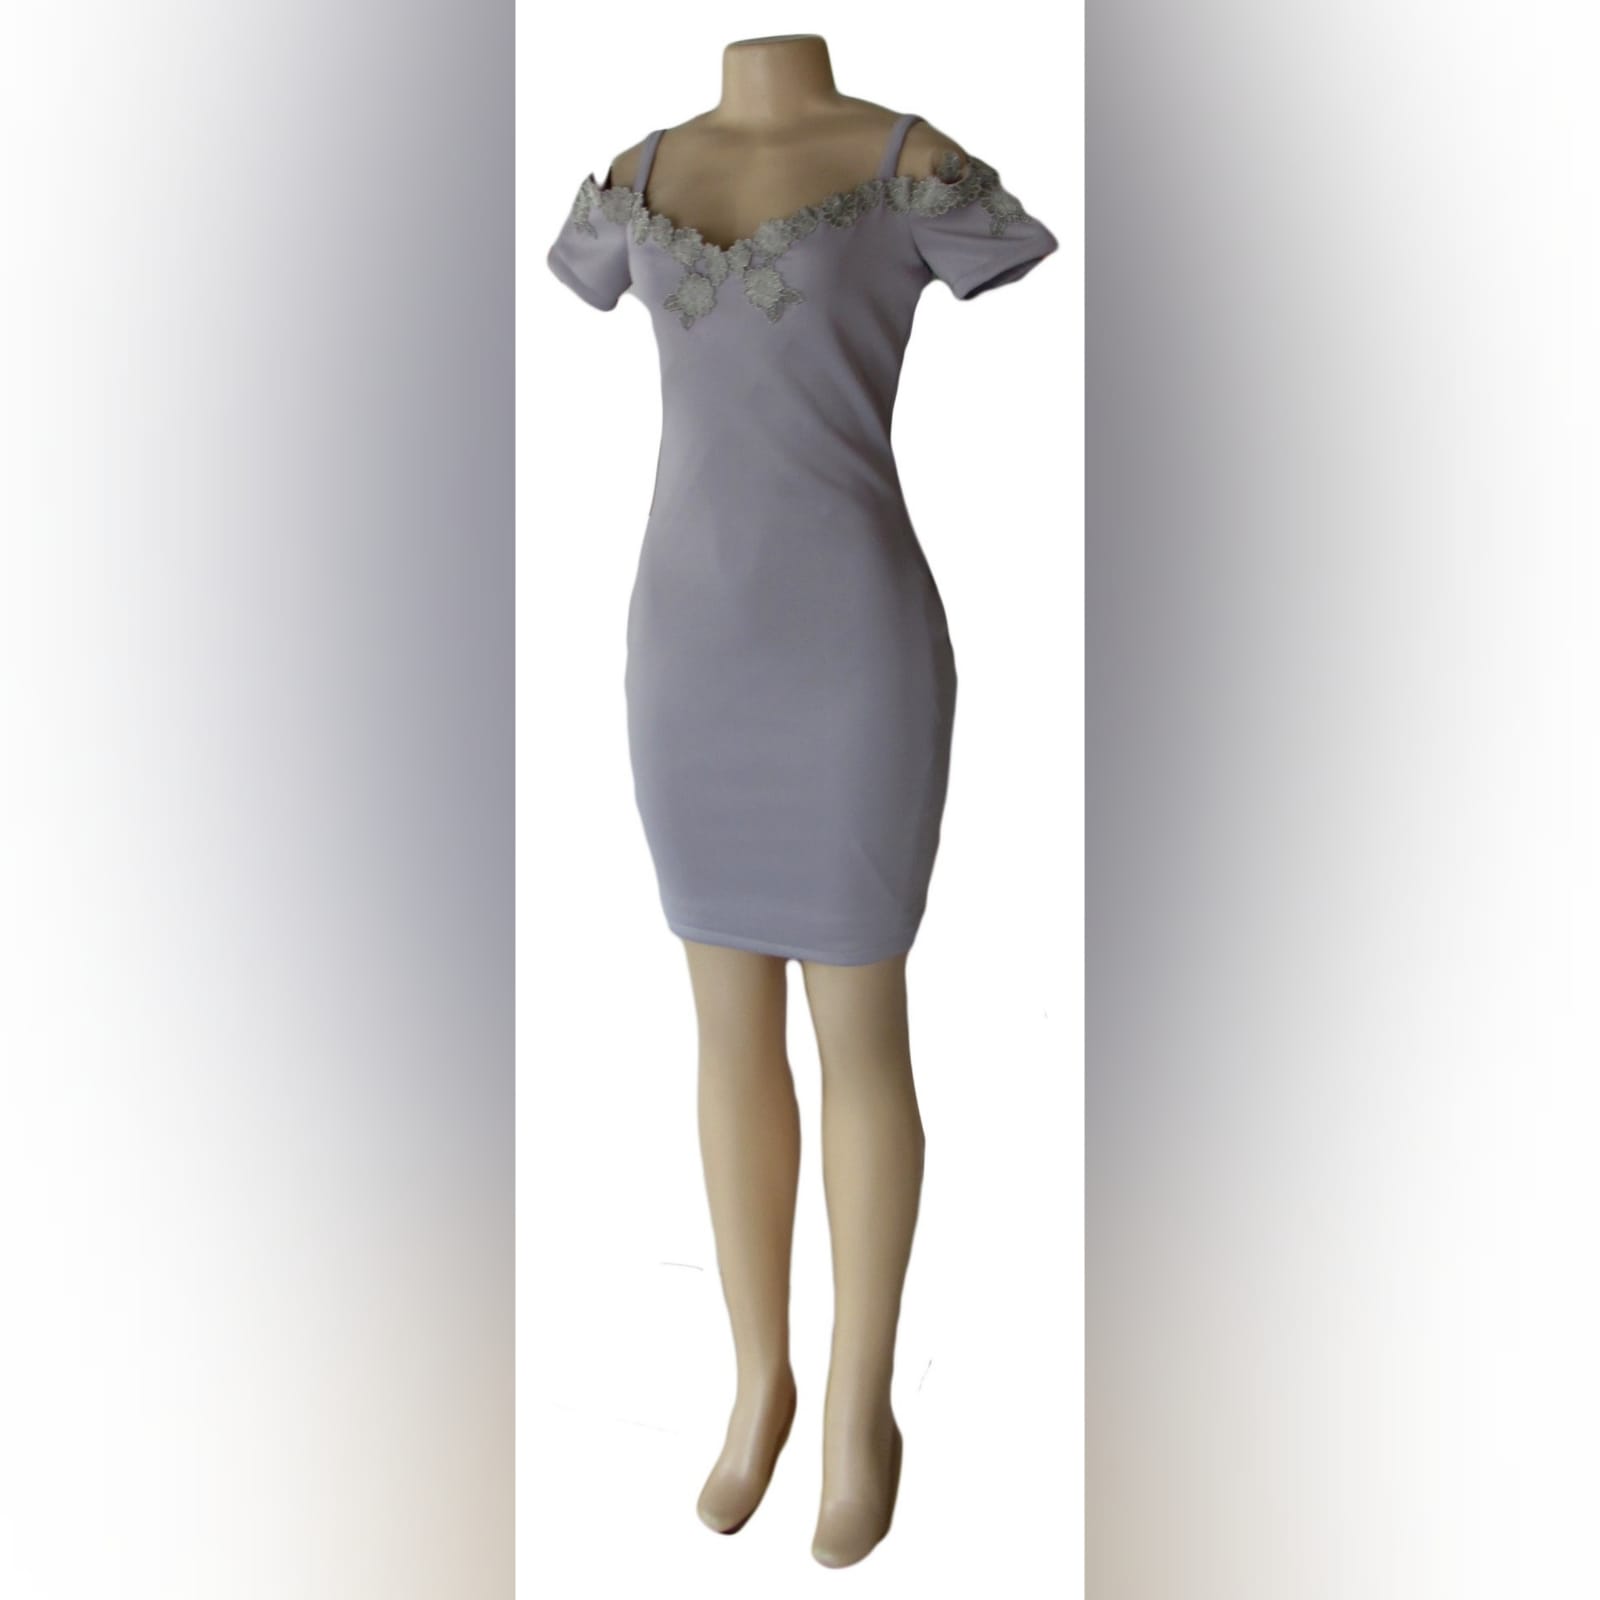 Light grey short fitted smart casual dress 4 light grey short fitted smart casual dress, with off shoulder shorter sleeves and shoulder straps. Neckline detailed with silver lace.